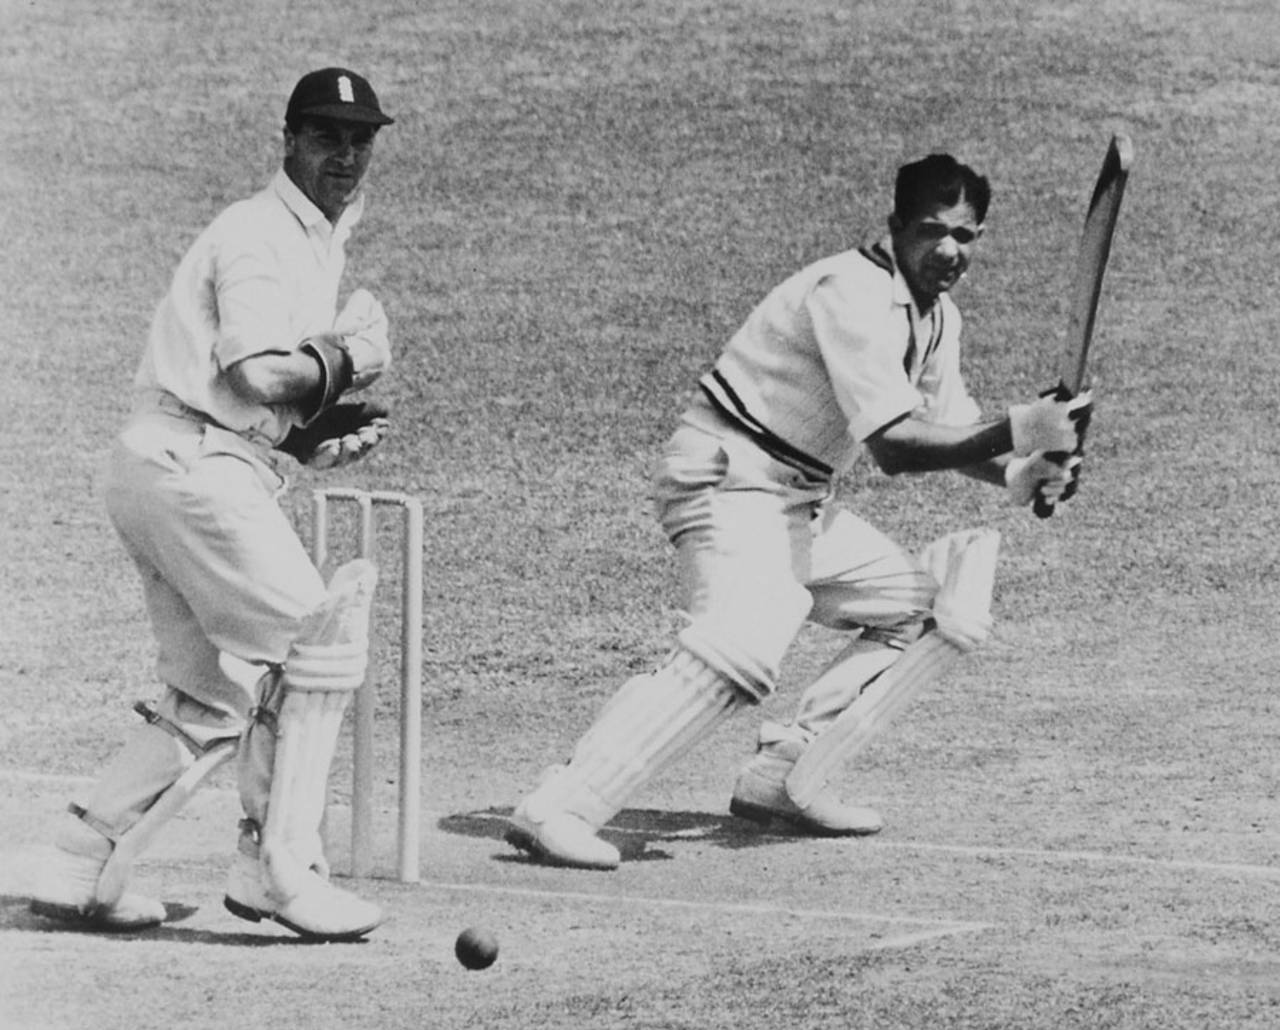 Vinoo Mankad bats on the way to 72, England v India, 2nd Test, Lord's, 19 June, 1952